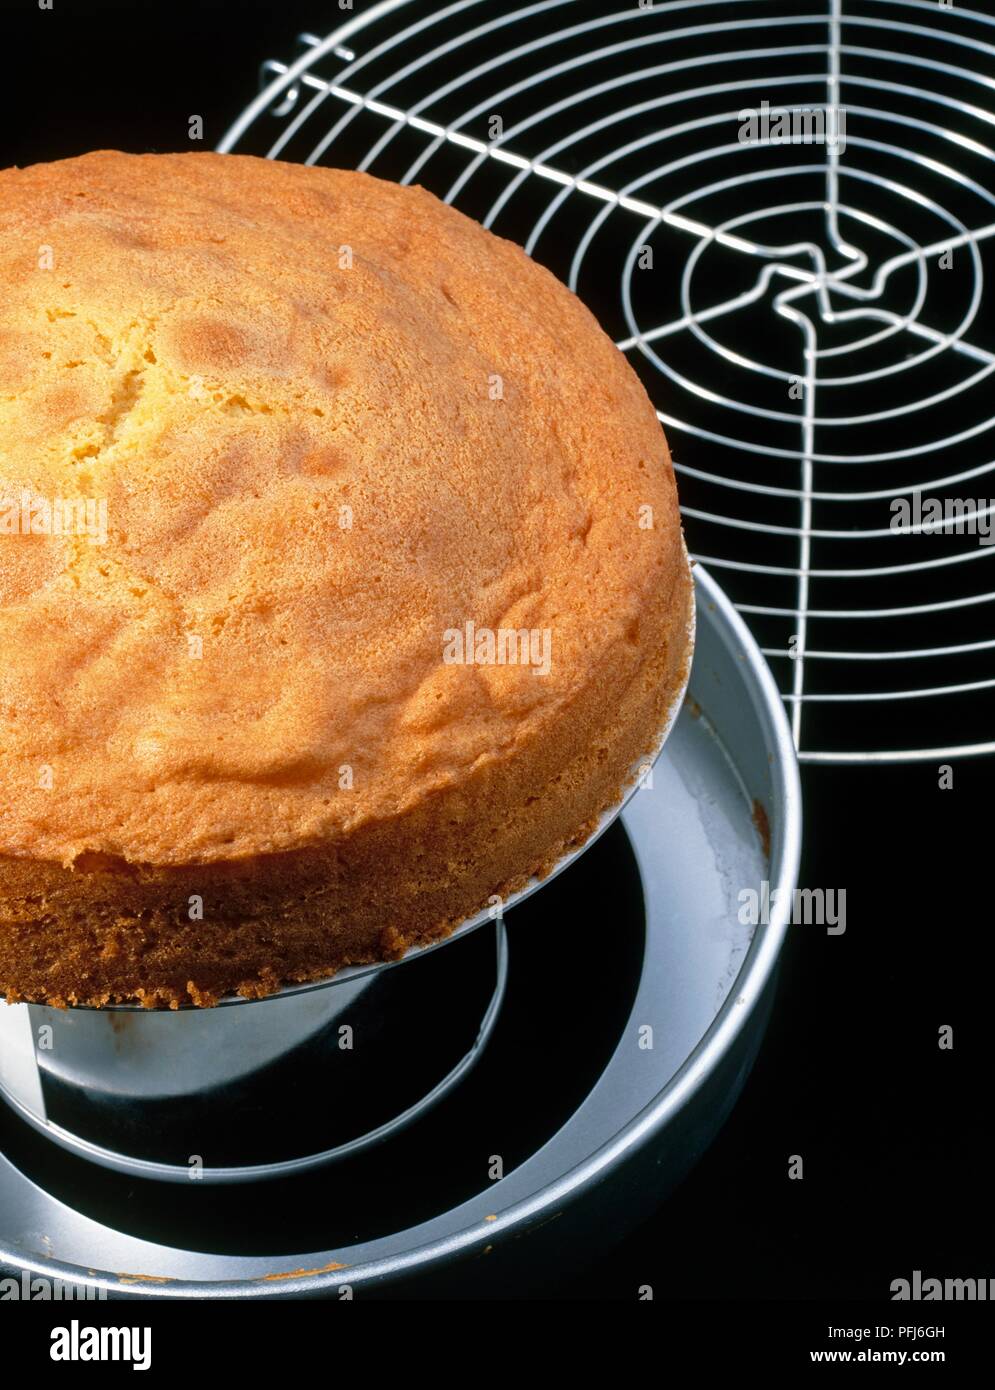 Baked sponge cake being removed from tin, cooling rack nearby, close-up Stock Photo